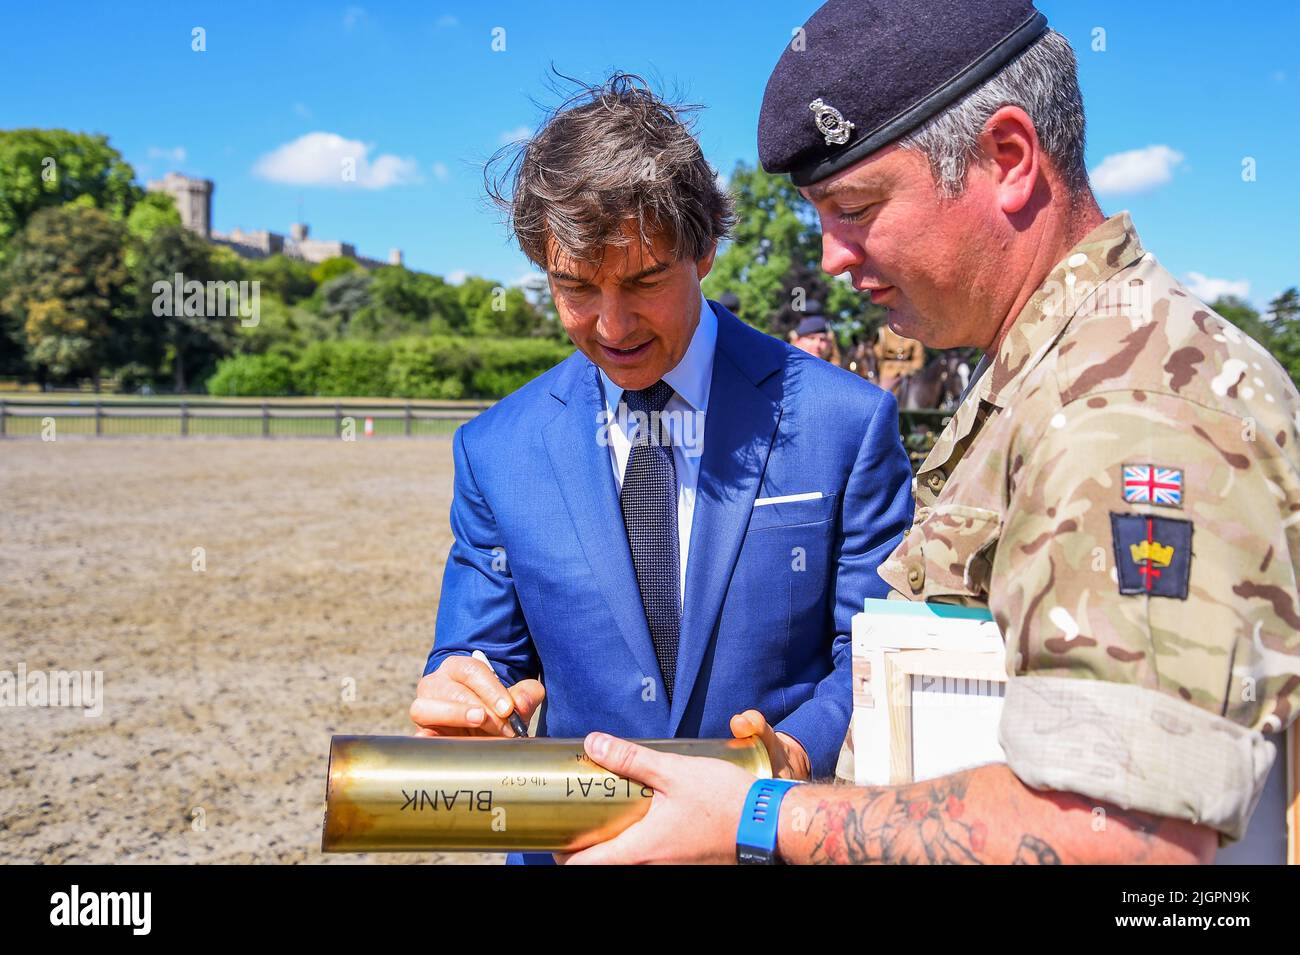 Windsor Castle, Windsor, Berkshire, UK. 8th July 2022. EMBARGOED UNTIL 12th JULY  Tom Cruise signing the cartridge shell which he fired from the 1st World War Gun that was used during the King's Troop Royal Horse Artillery display during the Platinum Jubilee Celebration back in May, which Tom introduced, on a private visit in the Private Grounds of Windsor Castle   Credit:Peter Nixon/Alamy Live News Stock Photo